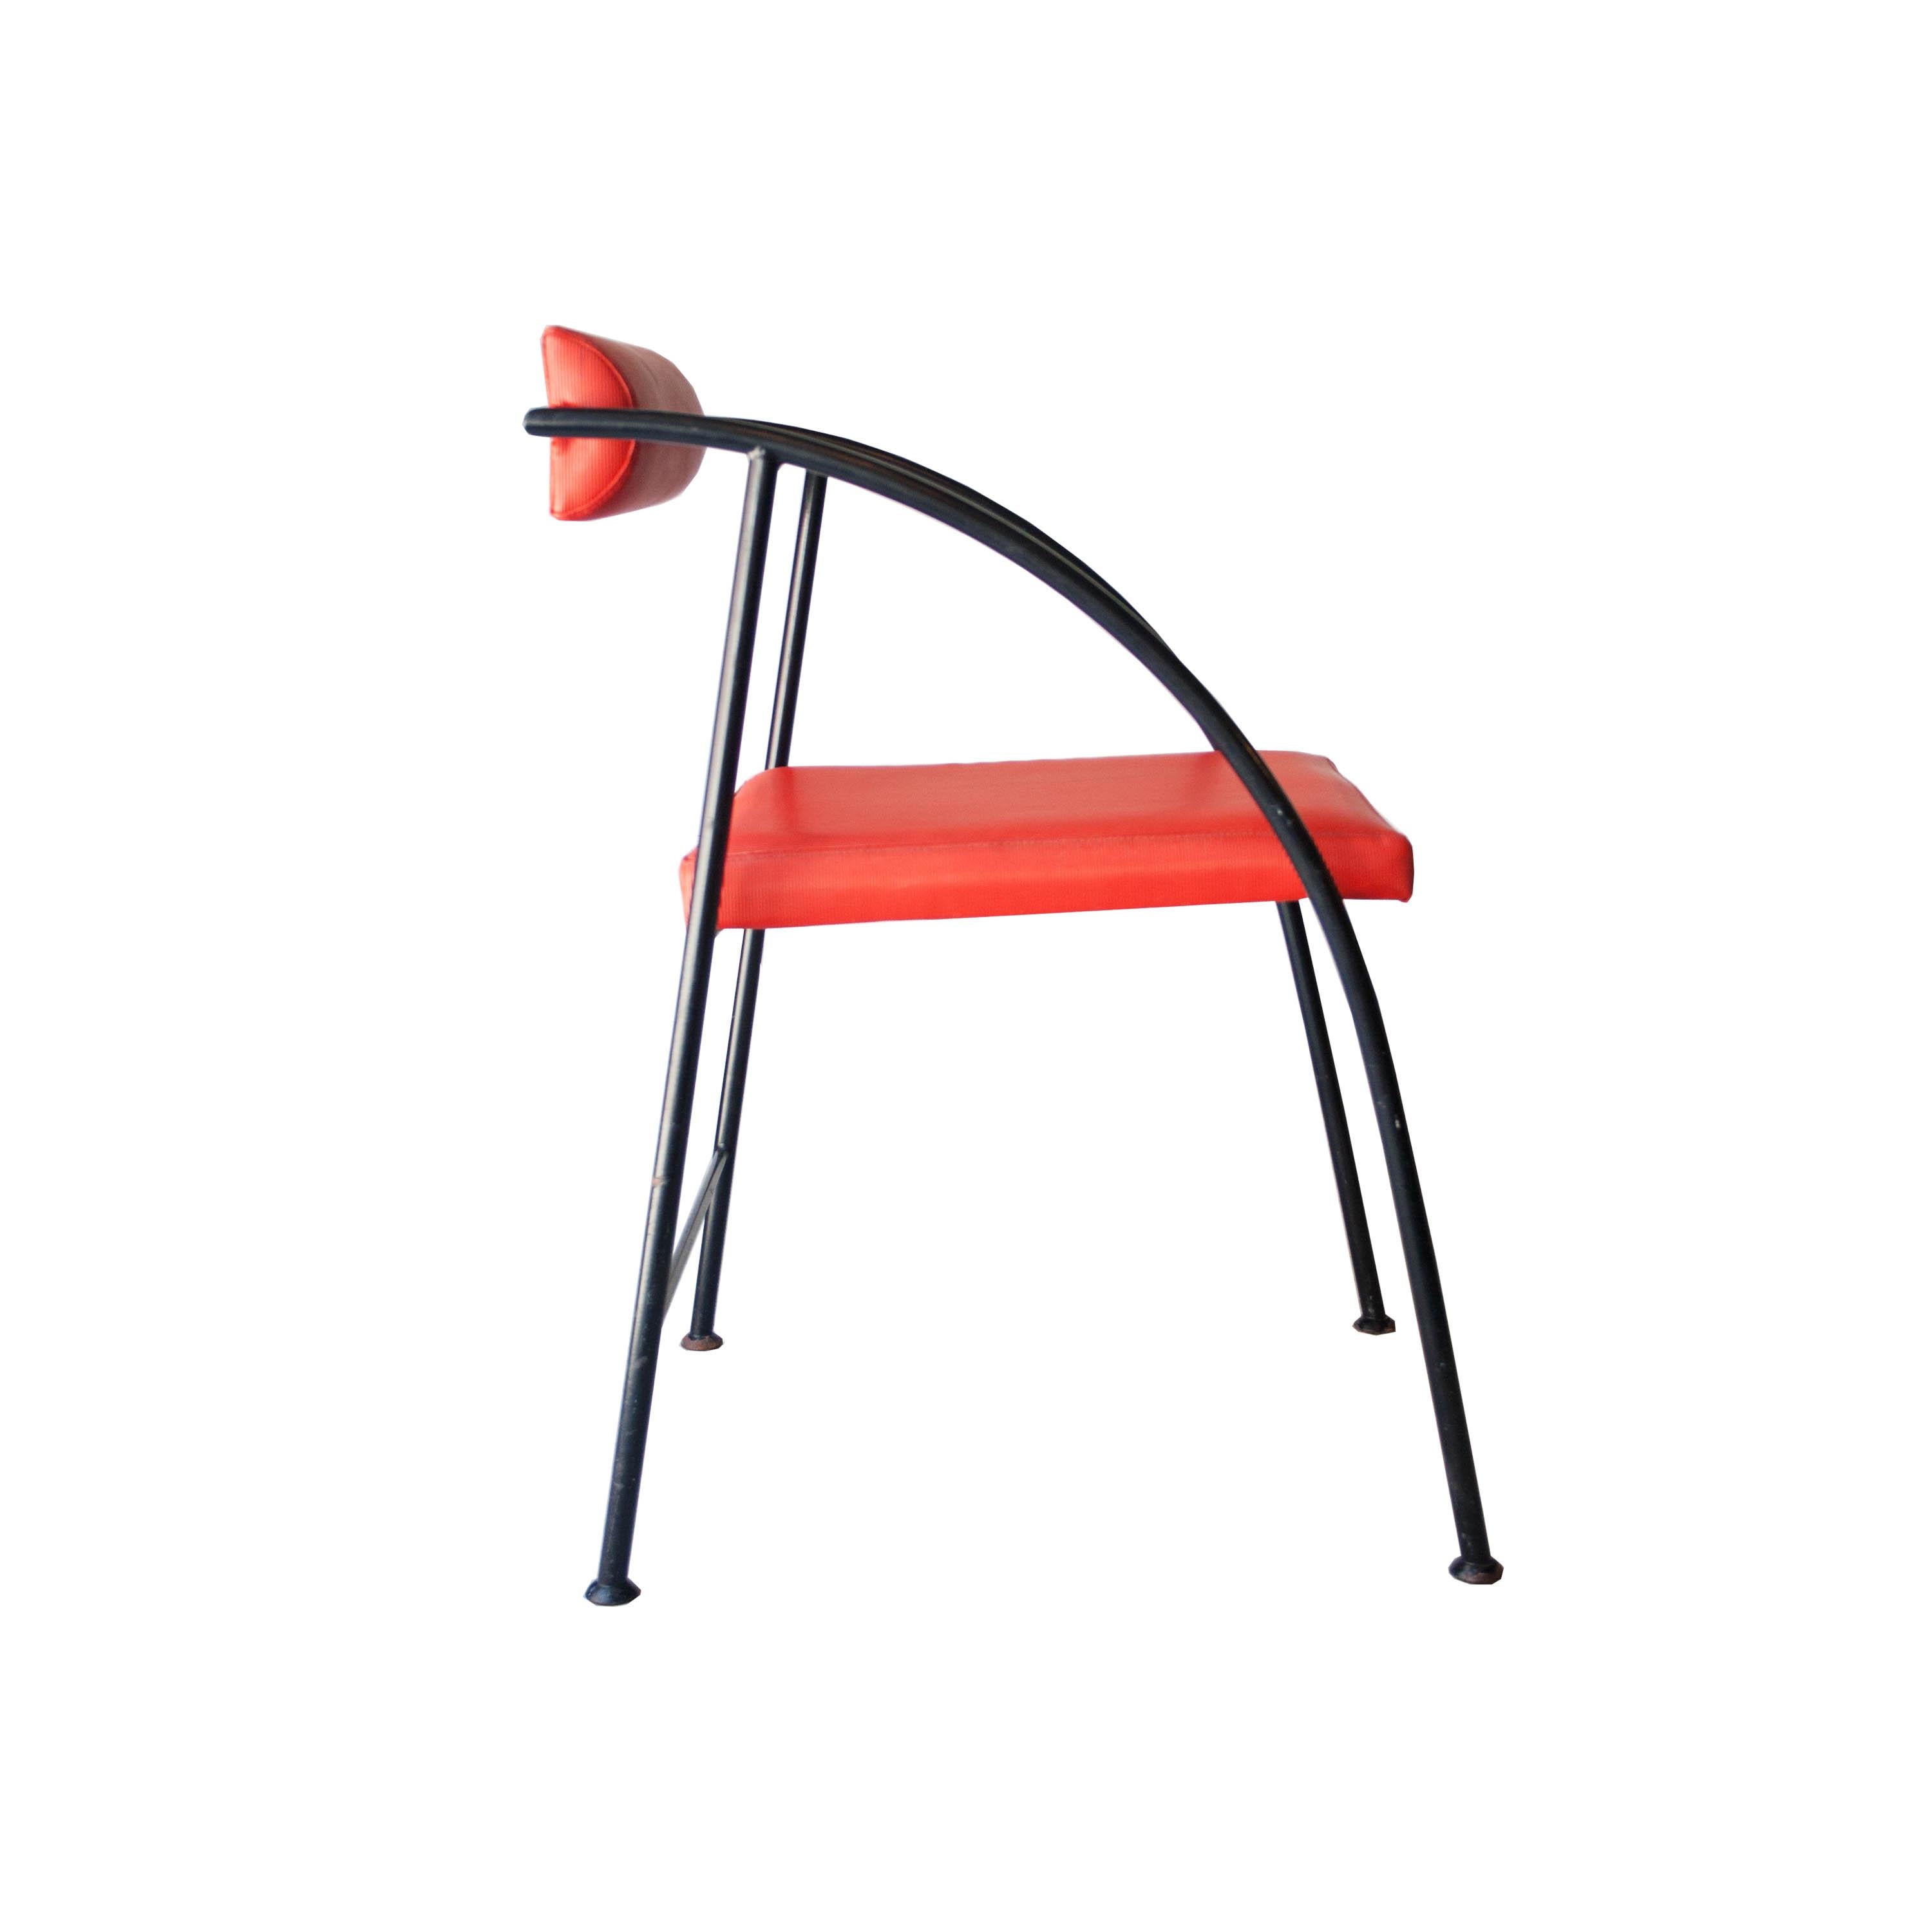 Chair designed by Rodney Kinsman with black lacquered metallic structure and red vinyl upholstery.